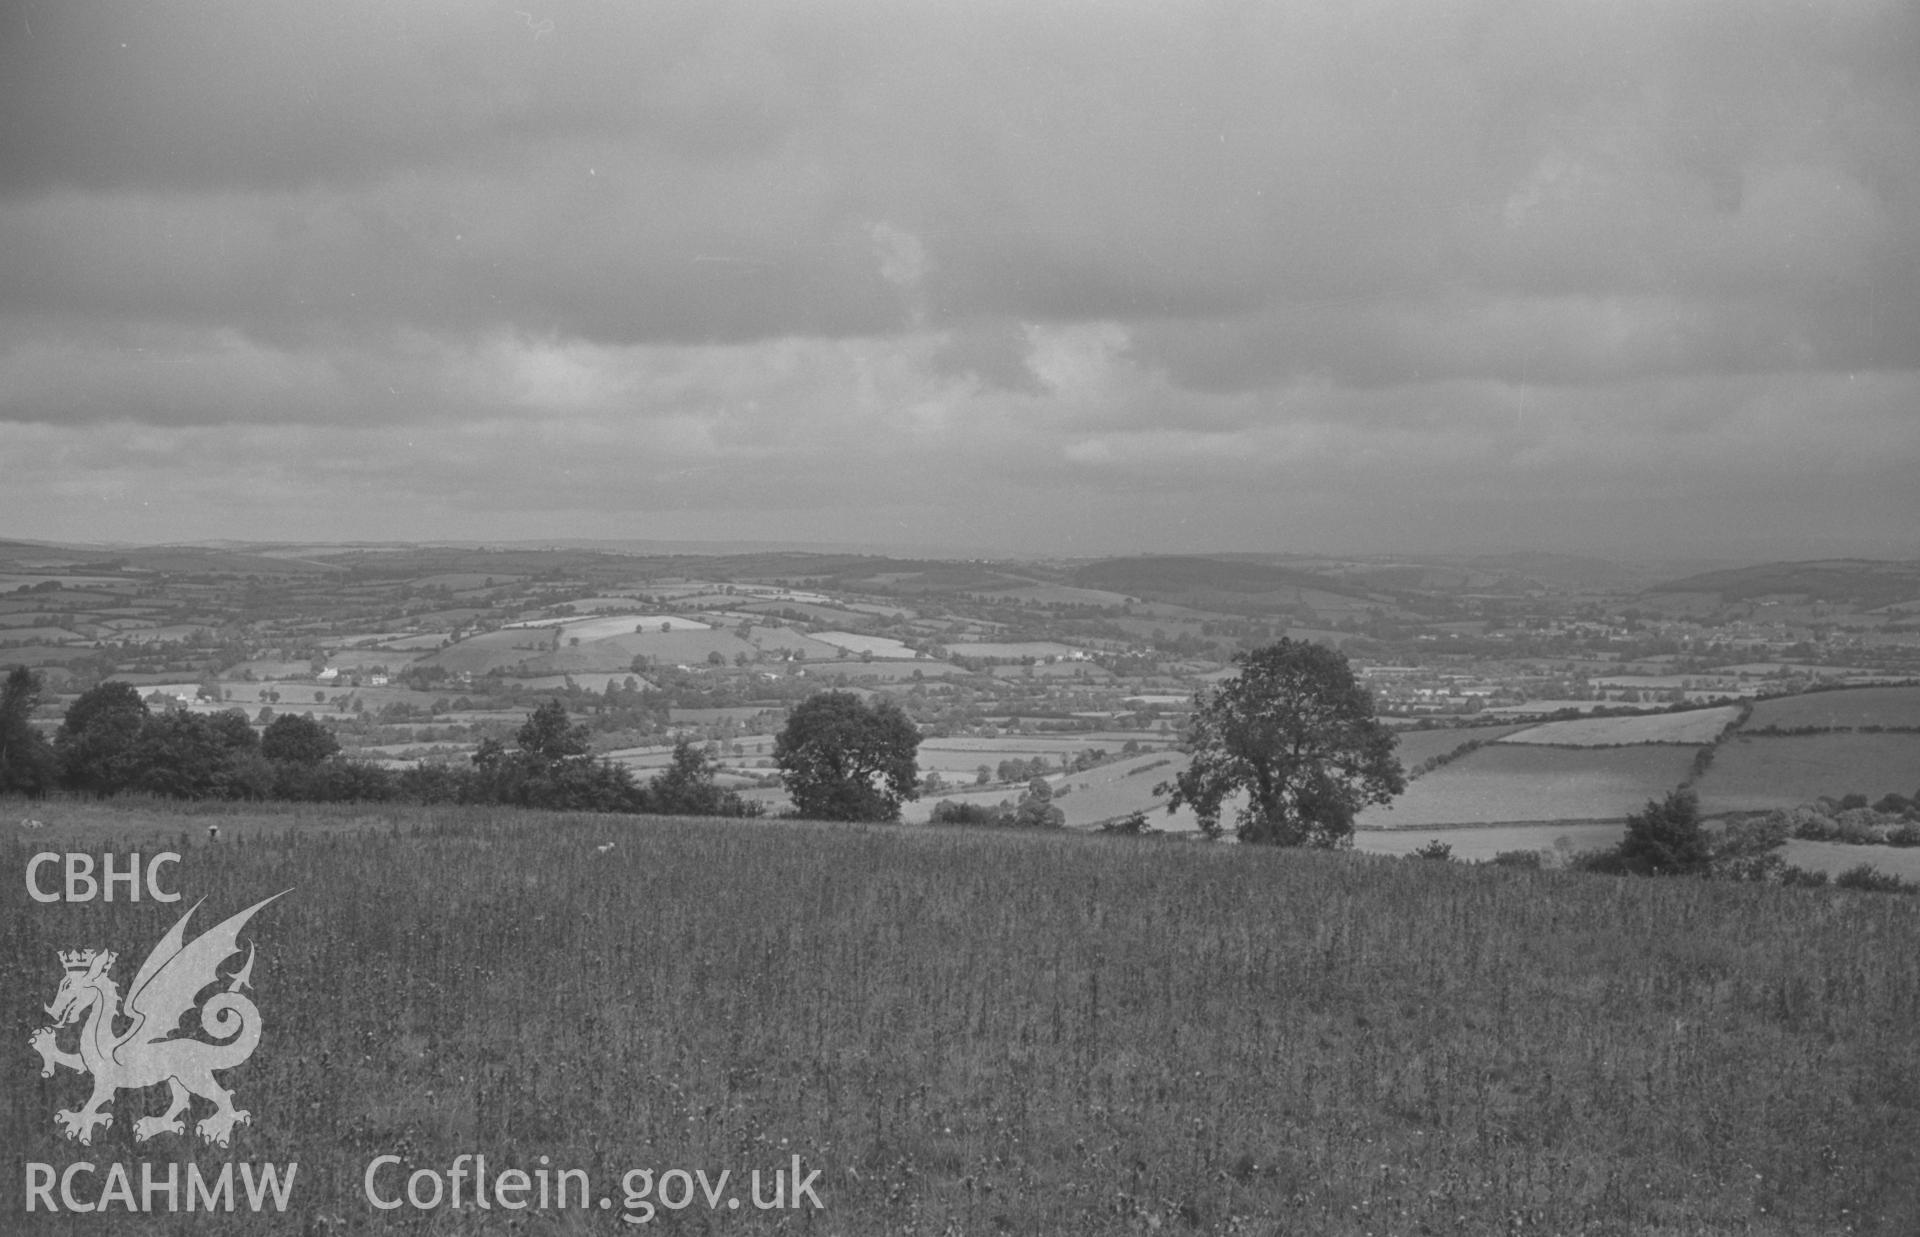 Digital copy of a black and white negative showing view of railway going through the Teifi Valley to Lampeter from Pencarreg. Photographed in September 1963 by Arthur O. Chater from Grid Reference SN 552 445, looking north east.